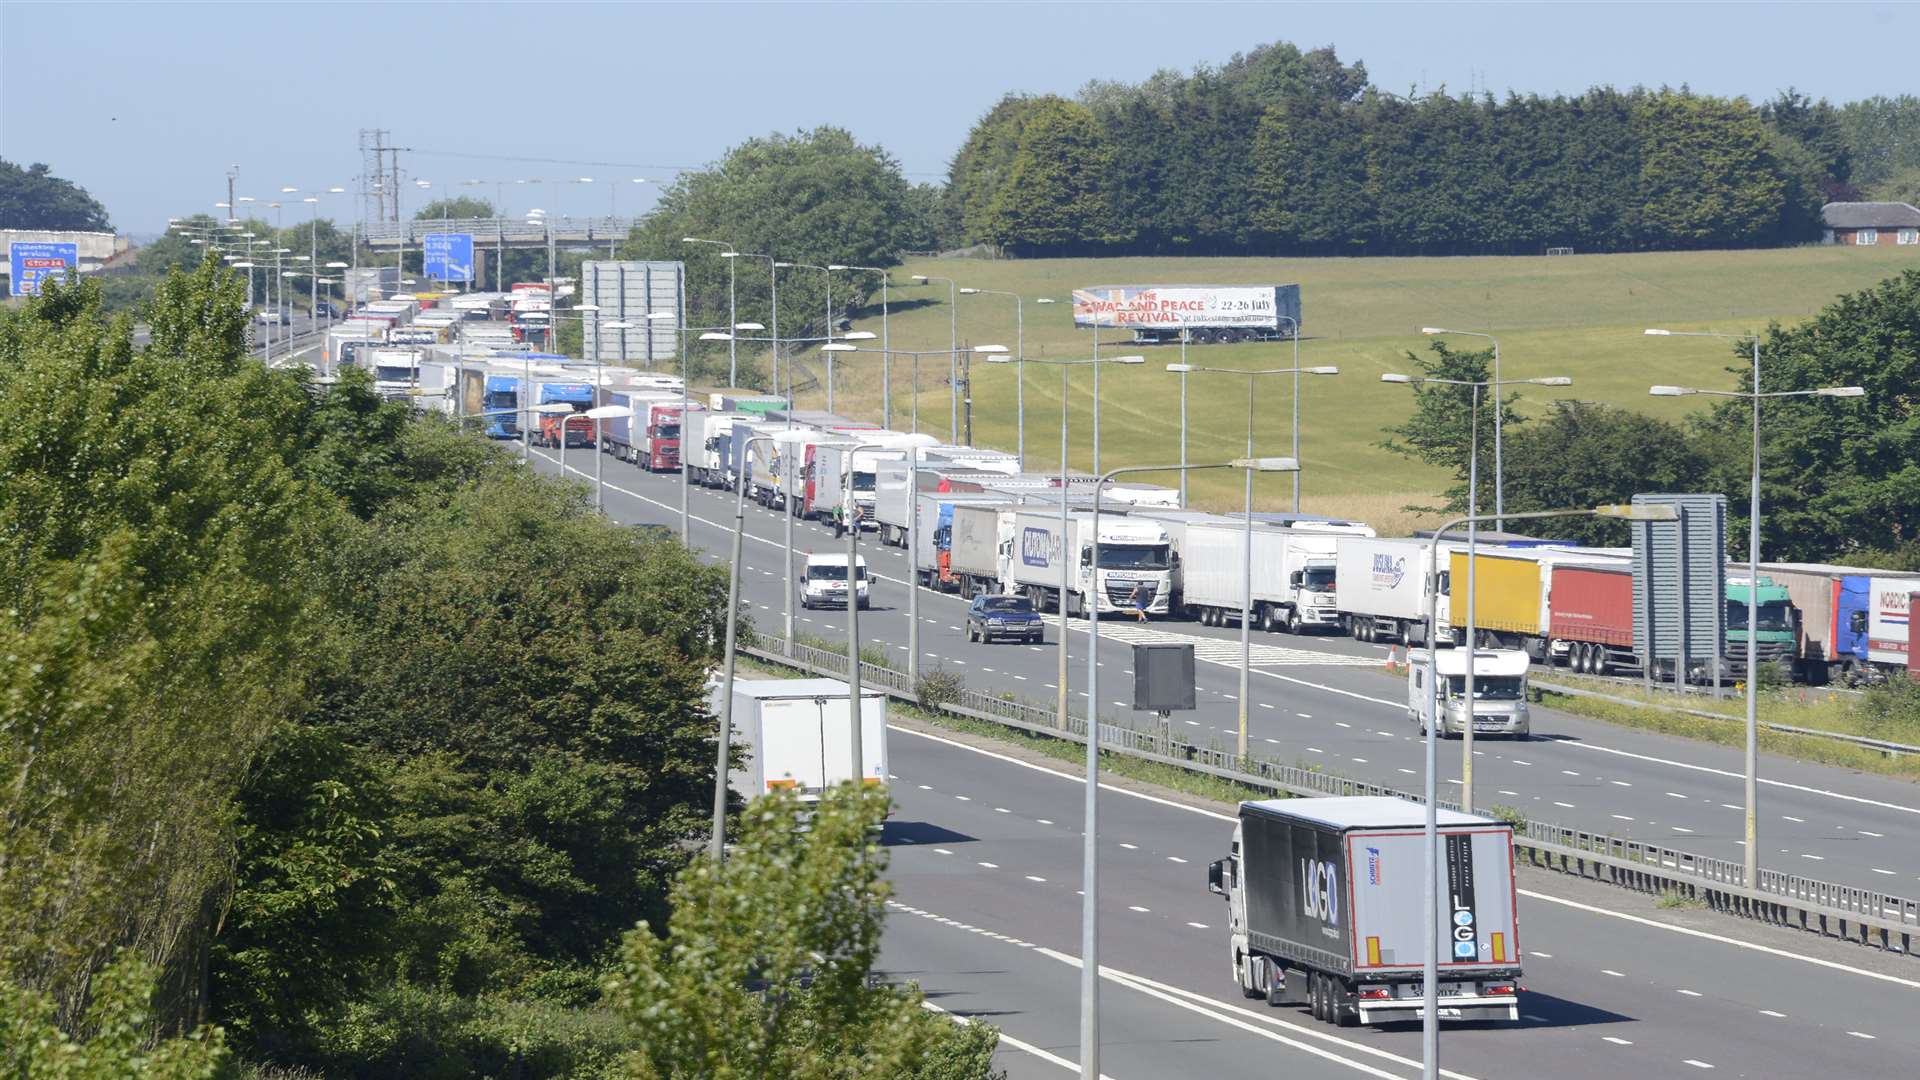 Freight traffic is being held in a stack on the M20. Picture: Paul Amos